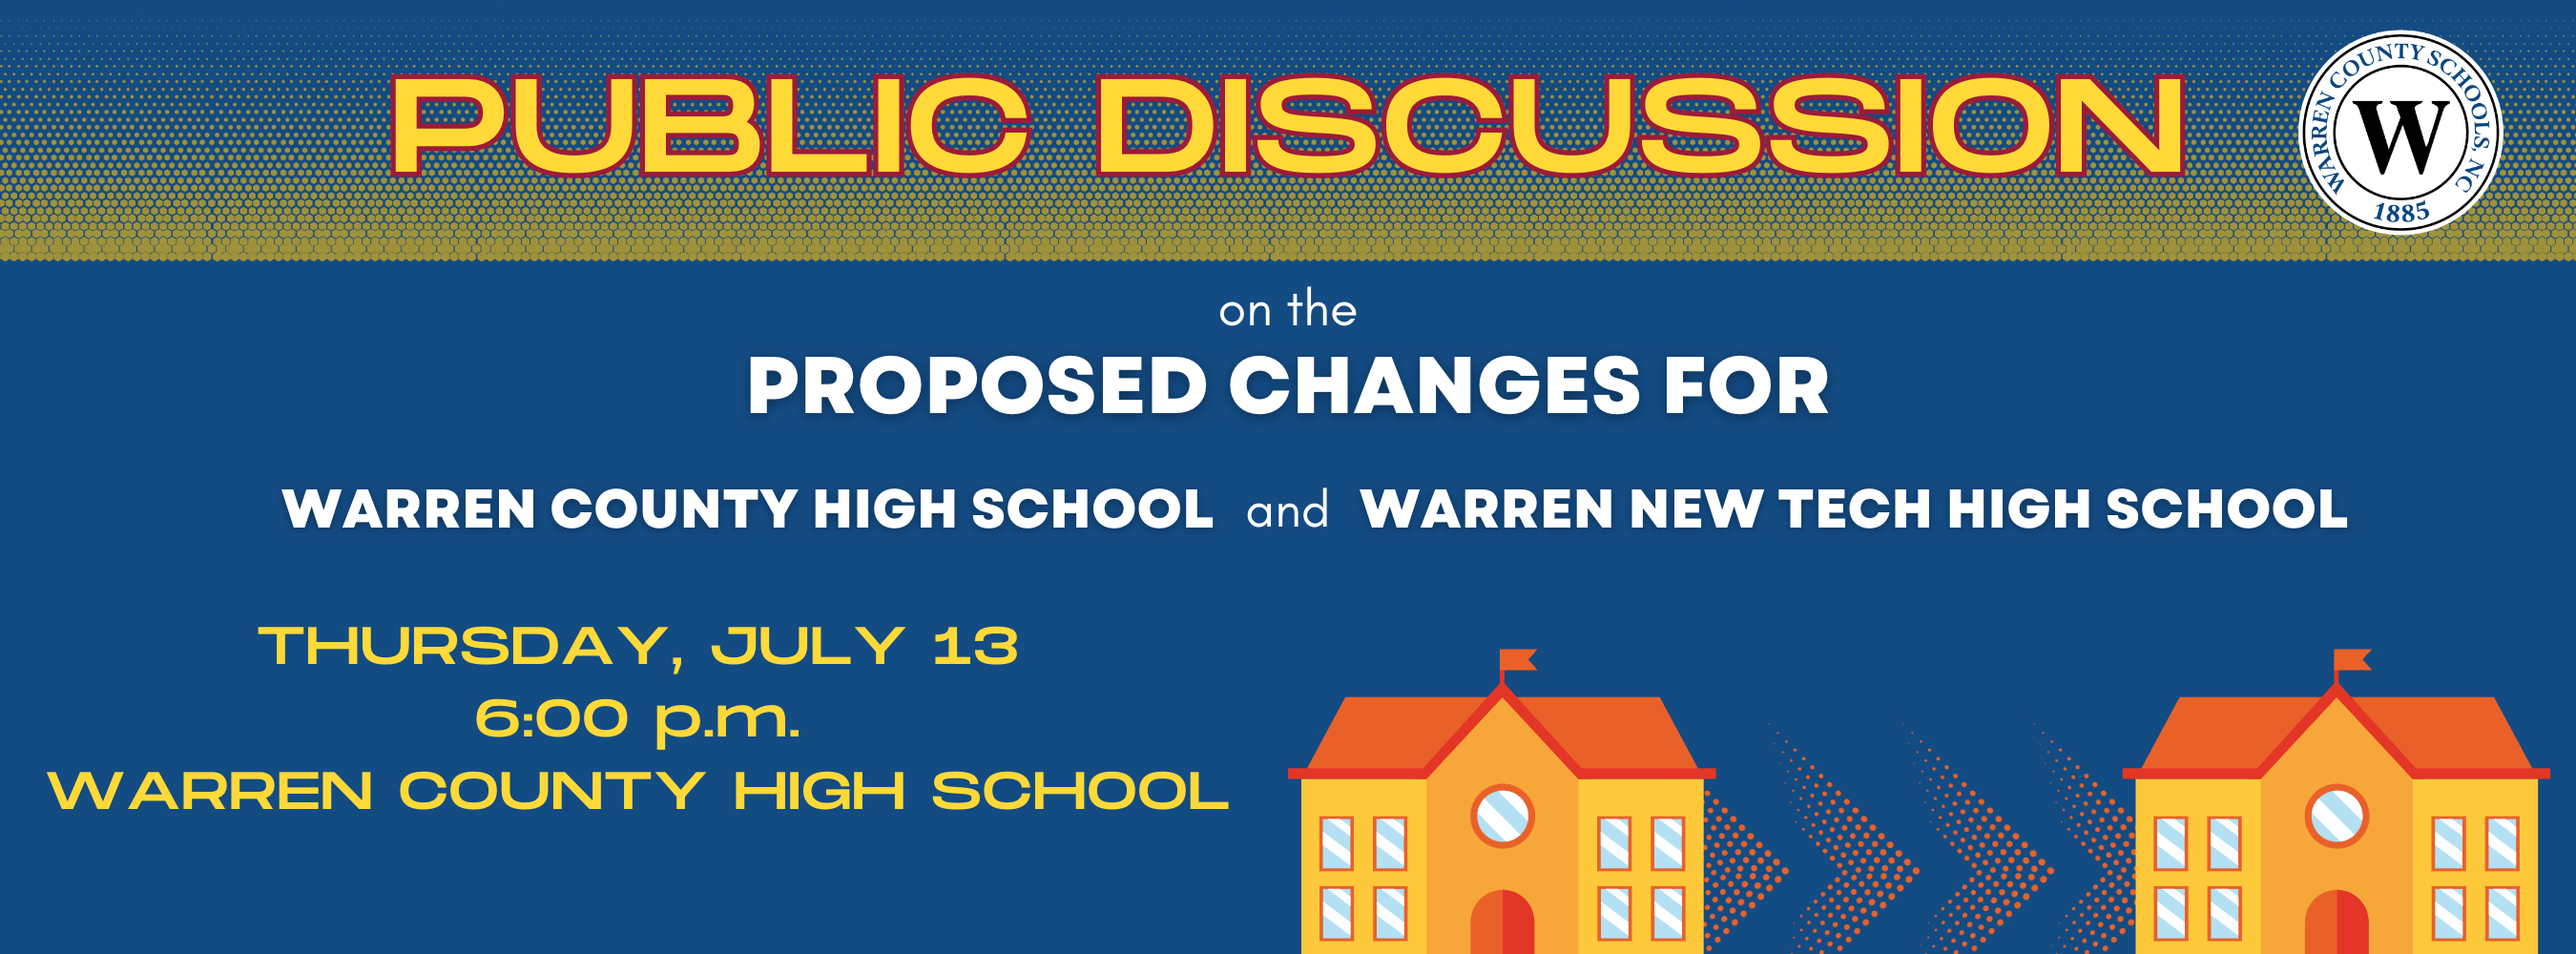 Public Discussion on the proposed changes for Warren County High School and Warren New Tech High School. Thursday, July 13 at 6:00 p.m. at Warren County High School.